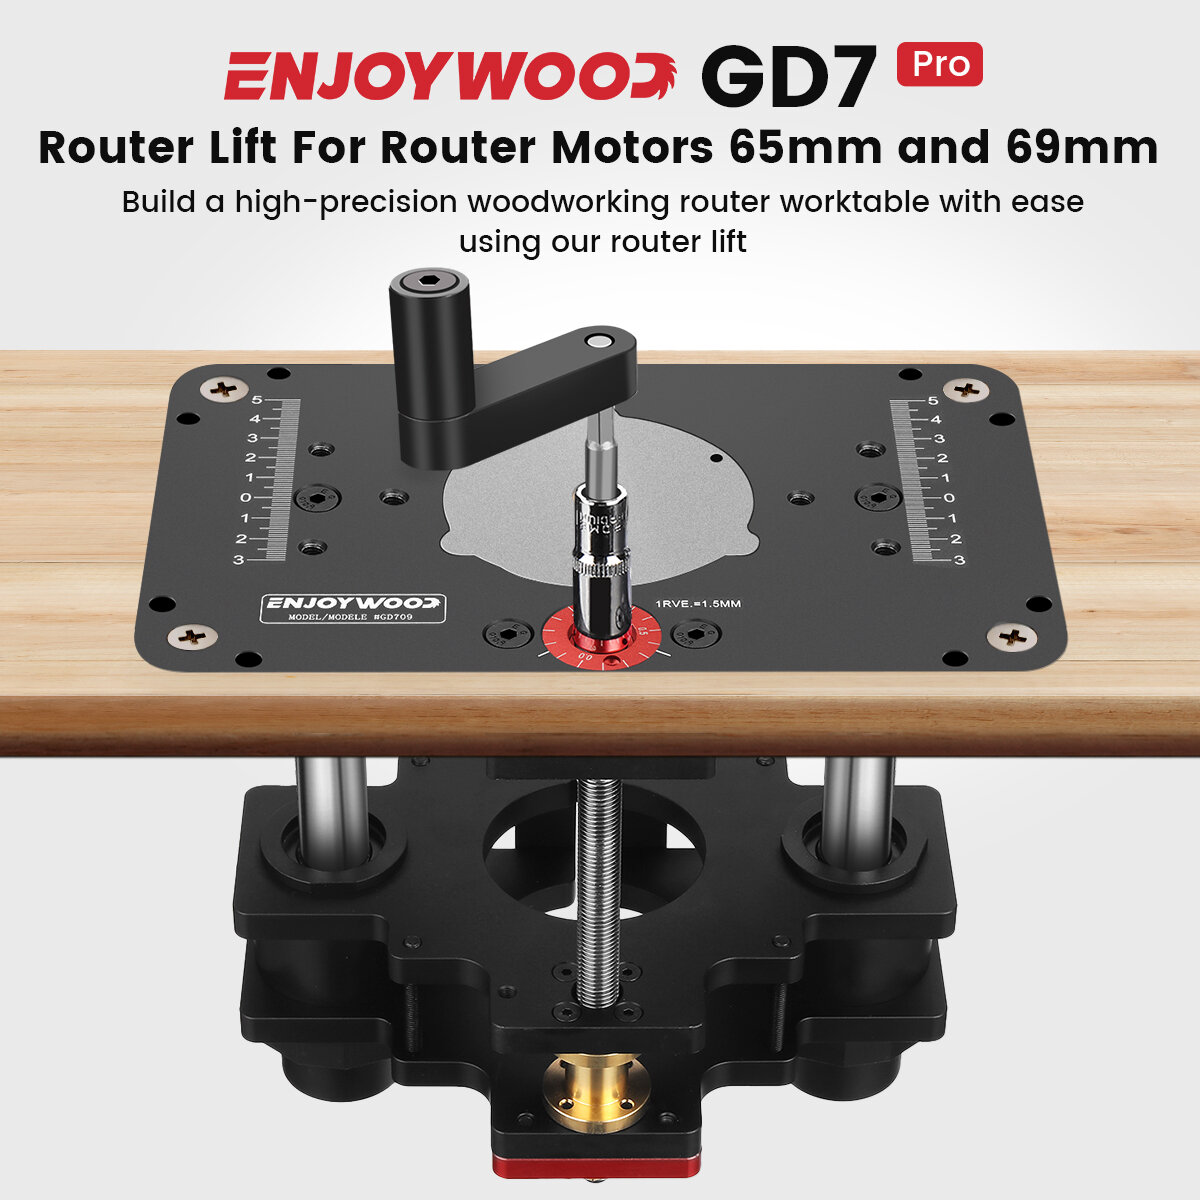 ENJOYWOOD GD7 PRO Router Lift for 65mm/69mm Wood Router for Router Table Set Up Lift with Router Plate Precision Woodworking